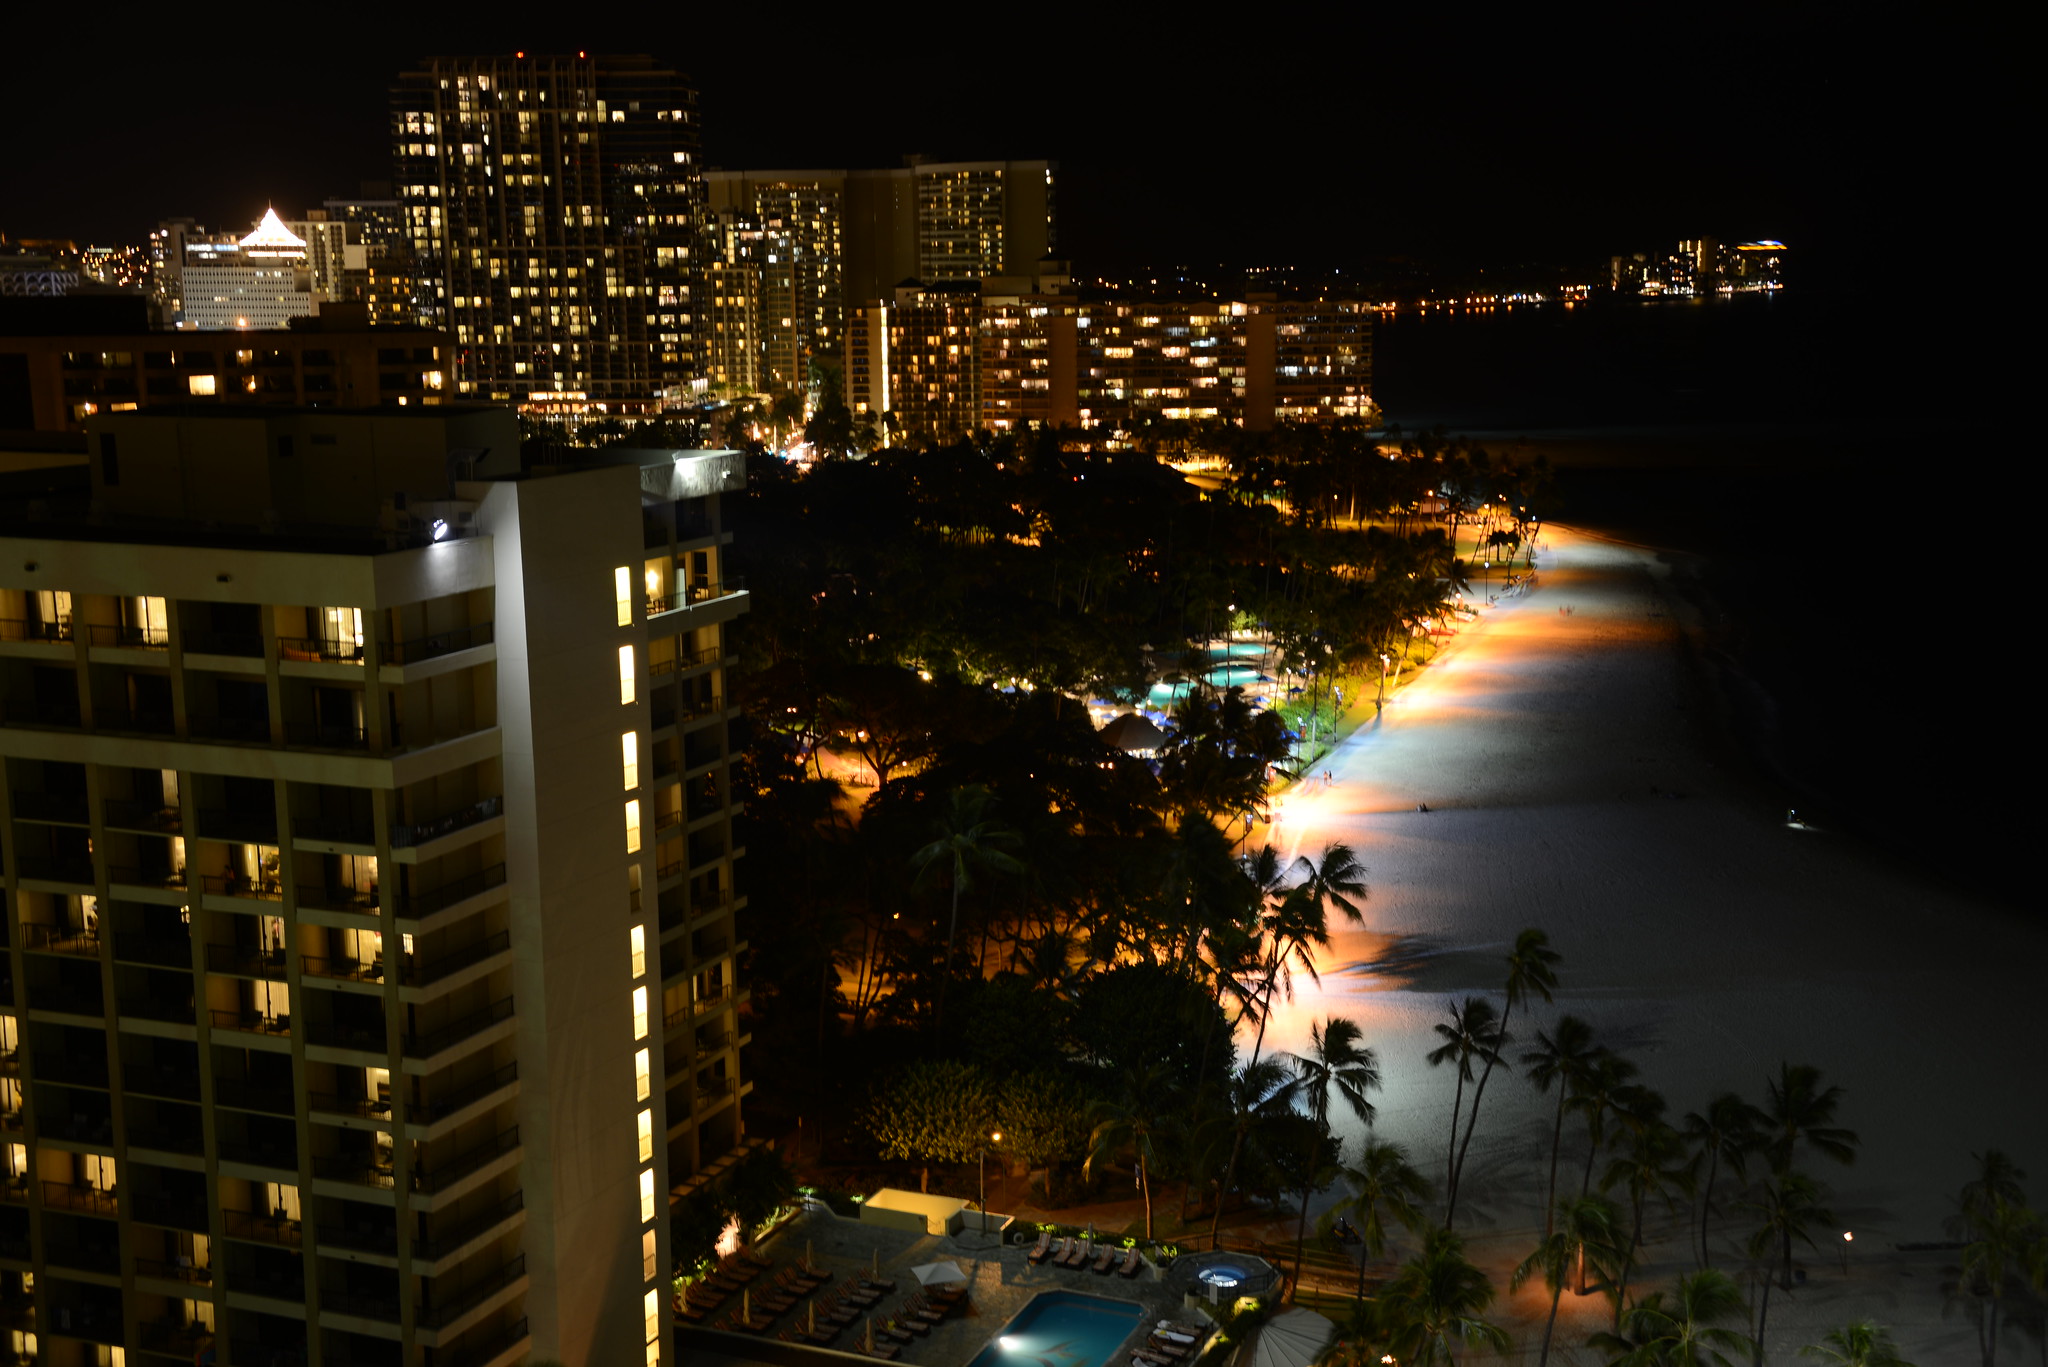 A view of the beach at night in Waikiki